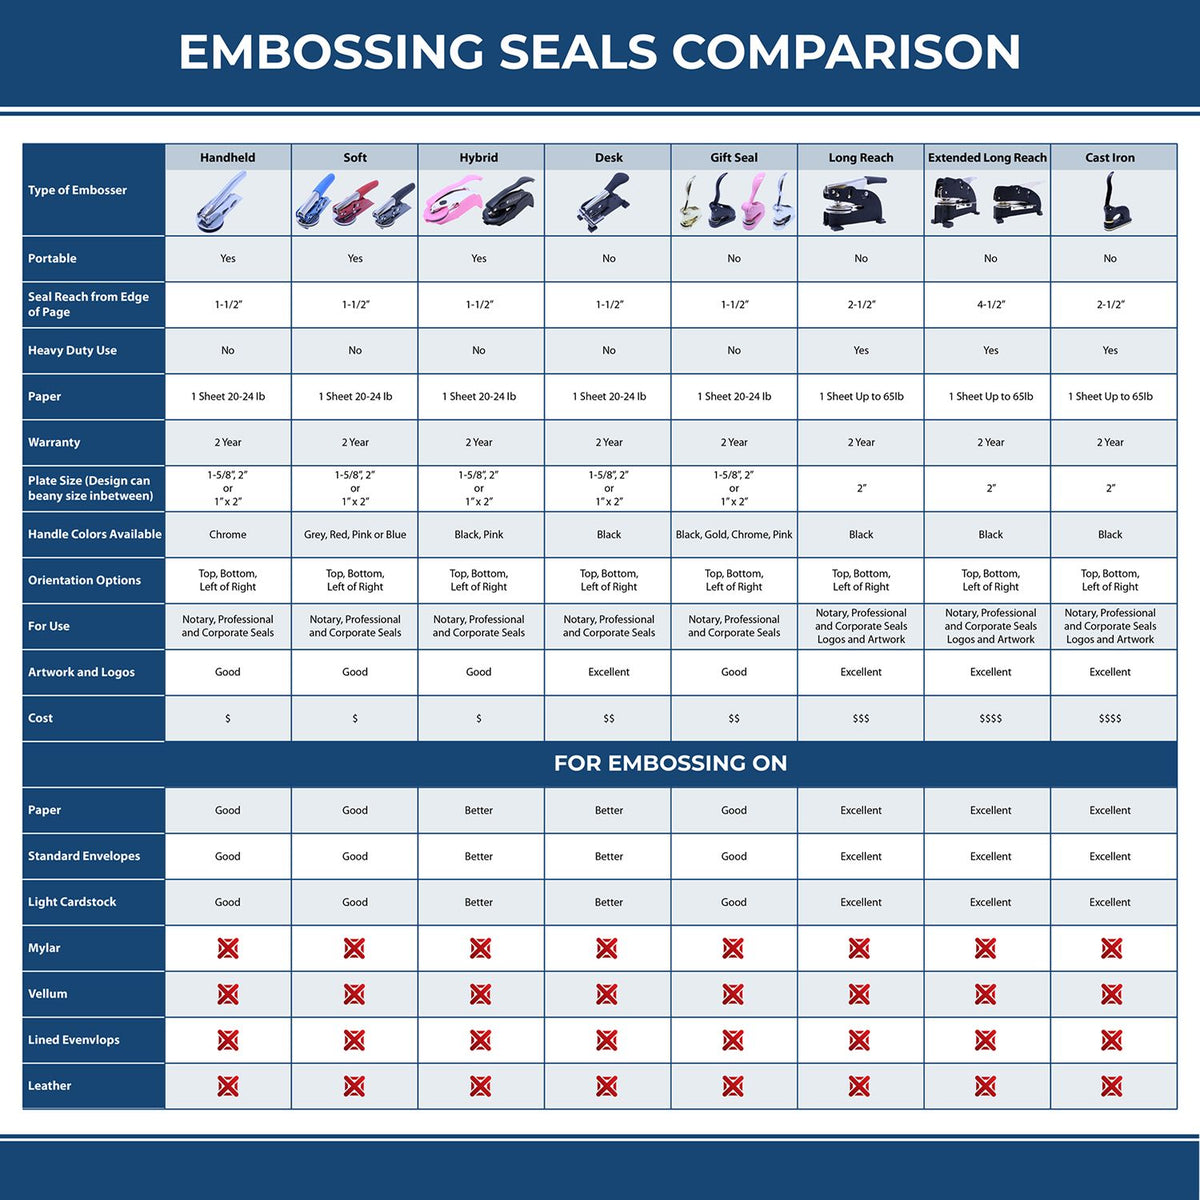 A comparison chart for the different types of mount models available for the Gift Massachusetts Land Surveyor Seal